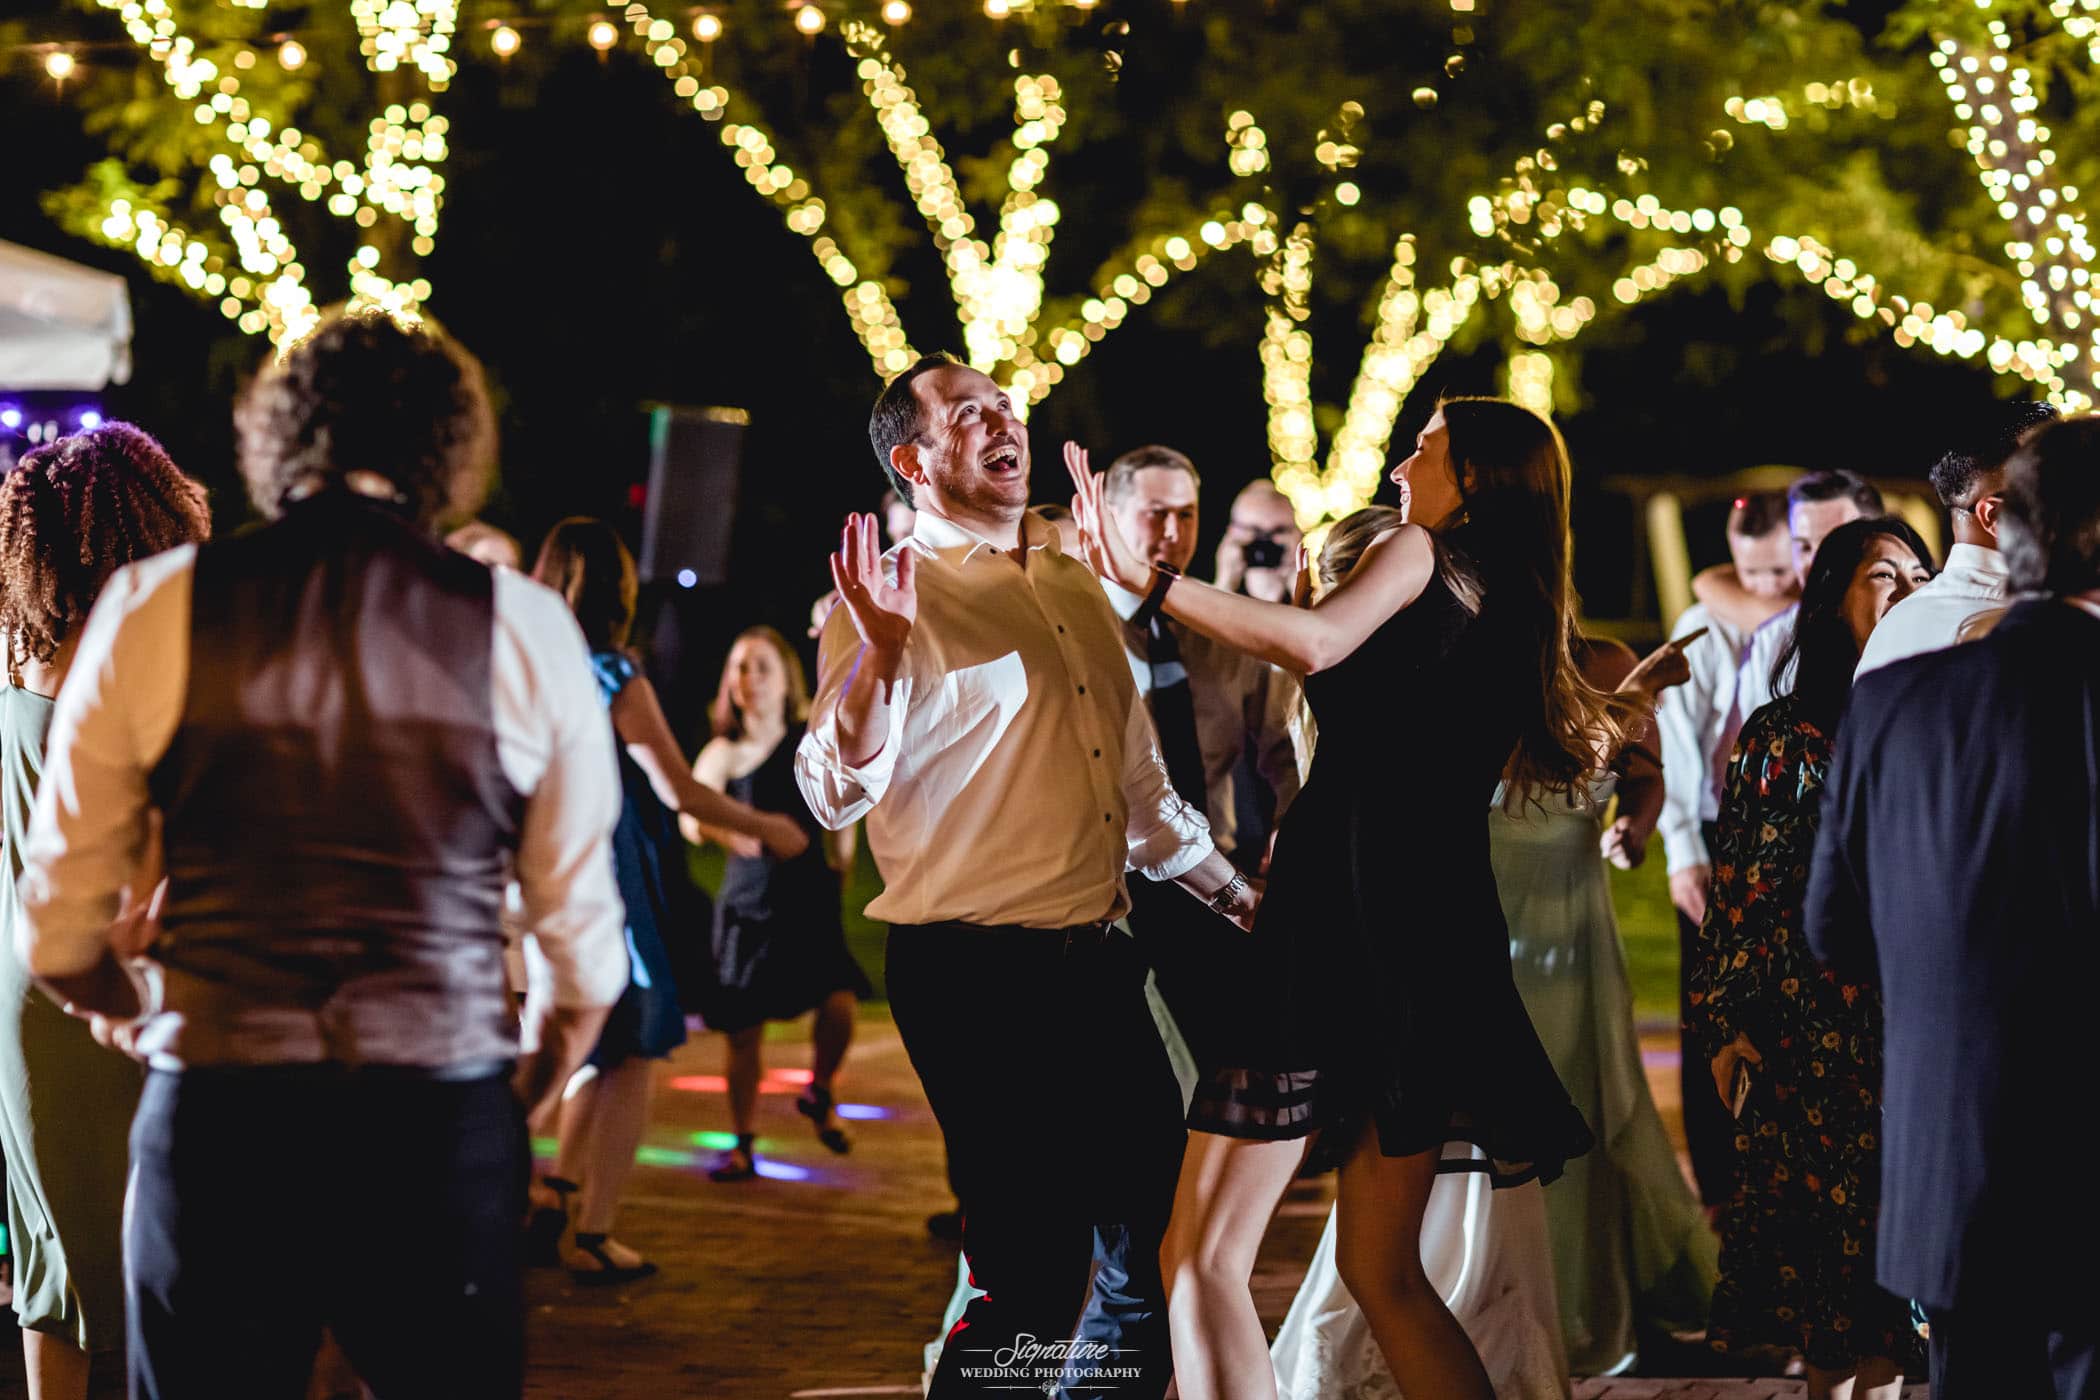 Wedding guests dancing outside candid